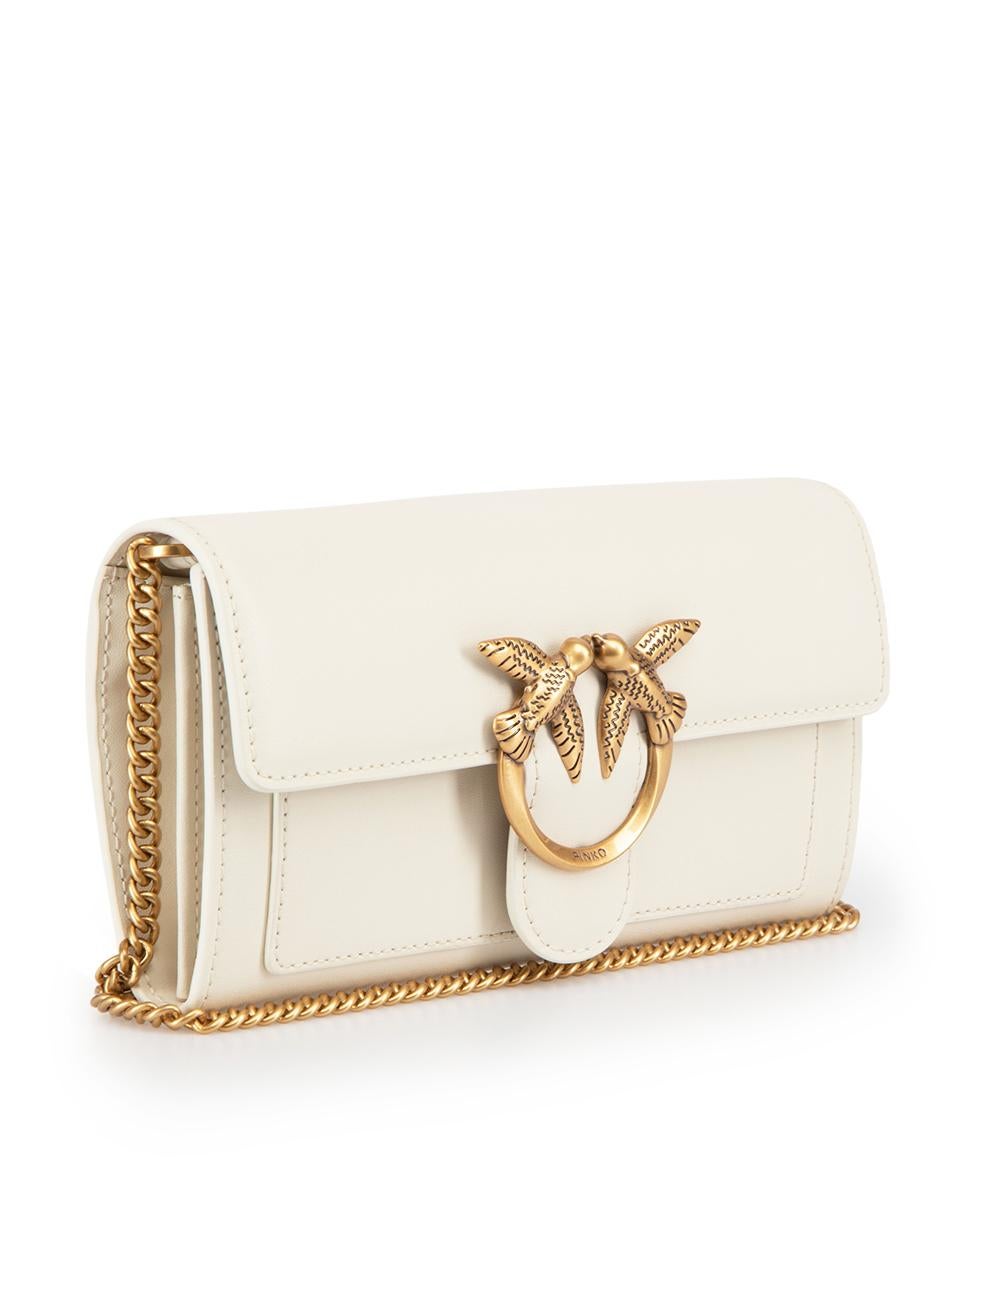 CONDITION is New with tags on this brand new Pinko designer item. This item comes with original packaging.
 
 
 
 Details
 
 
 Love One Wallet
 
 White
 
 Leather
 
 Wallet on chain
 
 Gold tone hardware
 
 Lovebirds buckle detail
 
 Detachable